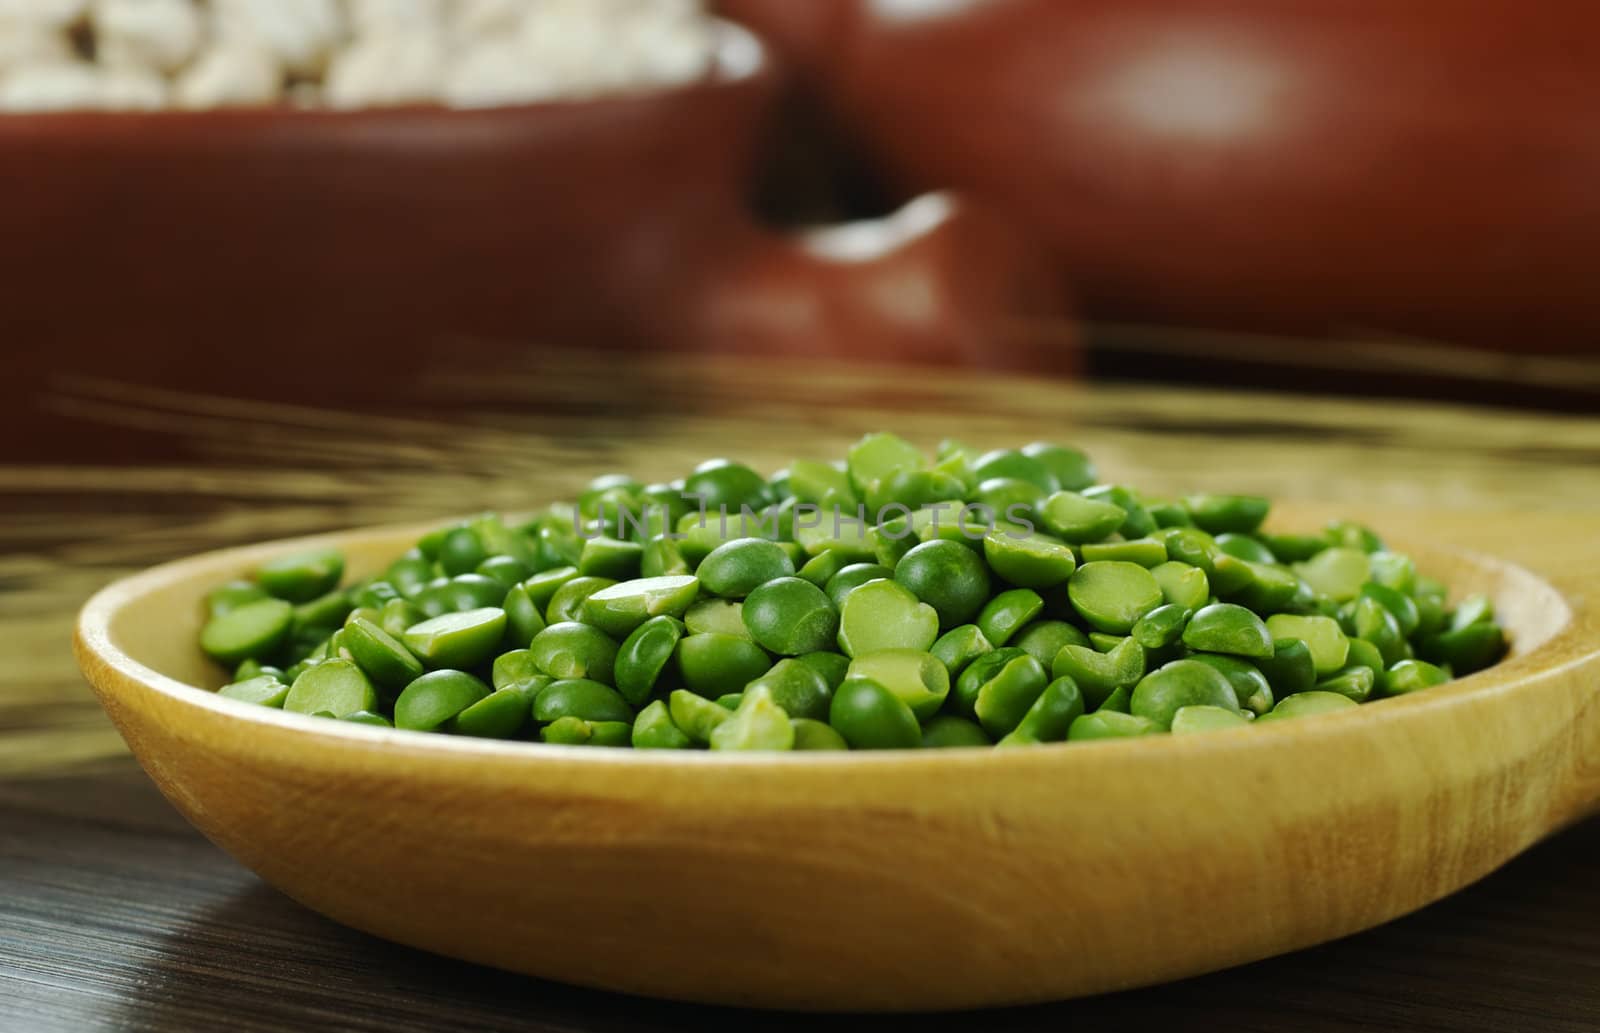 Dried green peas on wooden spoon with crop and bowls in the background (Selective Focus, Focus on the green peas)